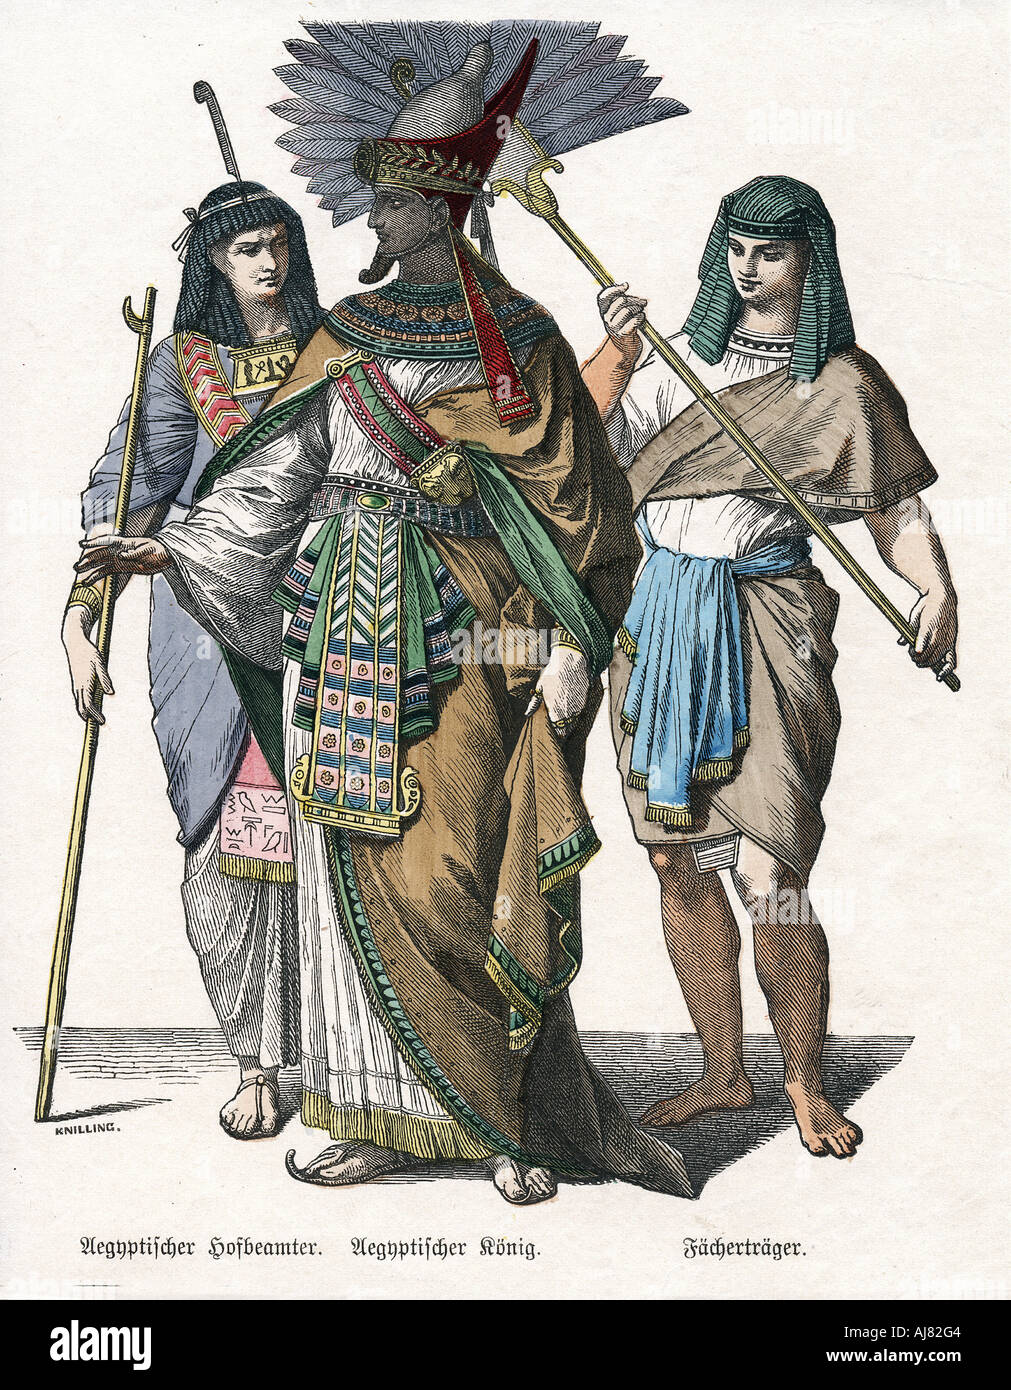 Egyptian king and male attendants, mid 19th century. Artist: Knilling Stock Photo